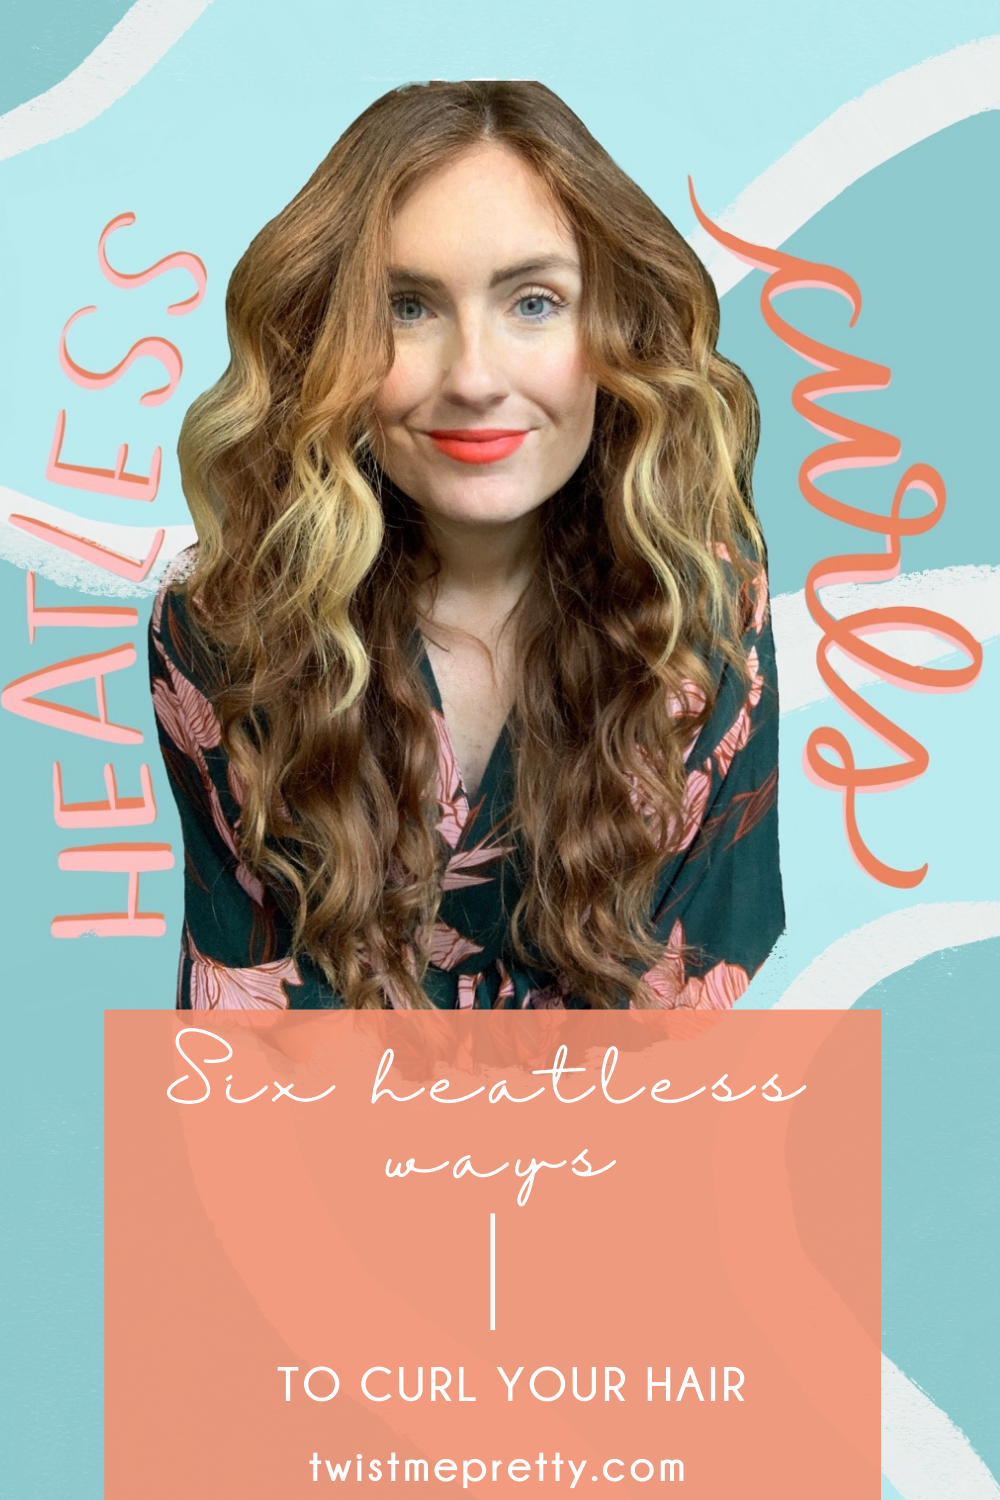 6 Heatless Ways to Curl Your Hair - Twist Me Pretty